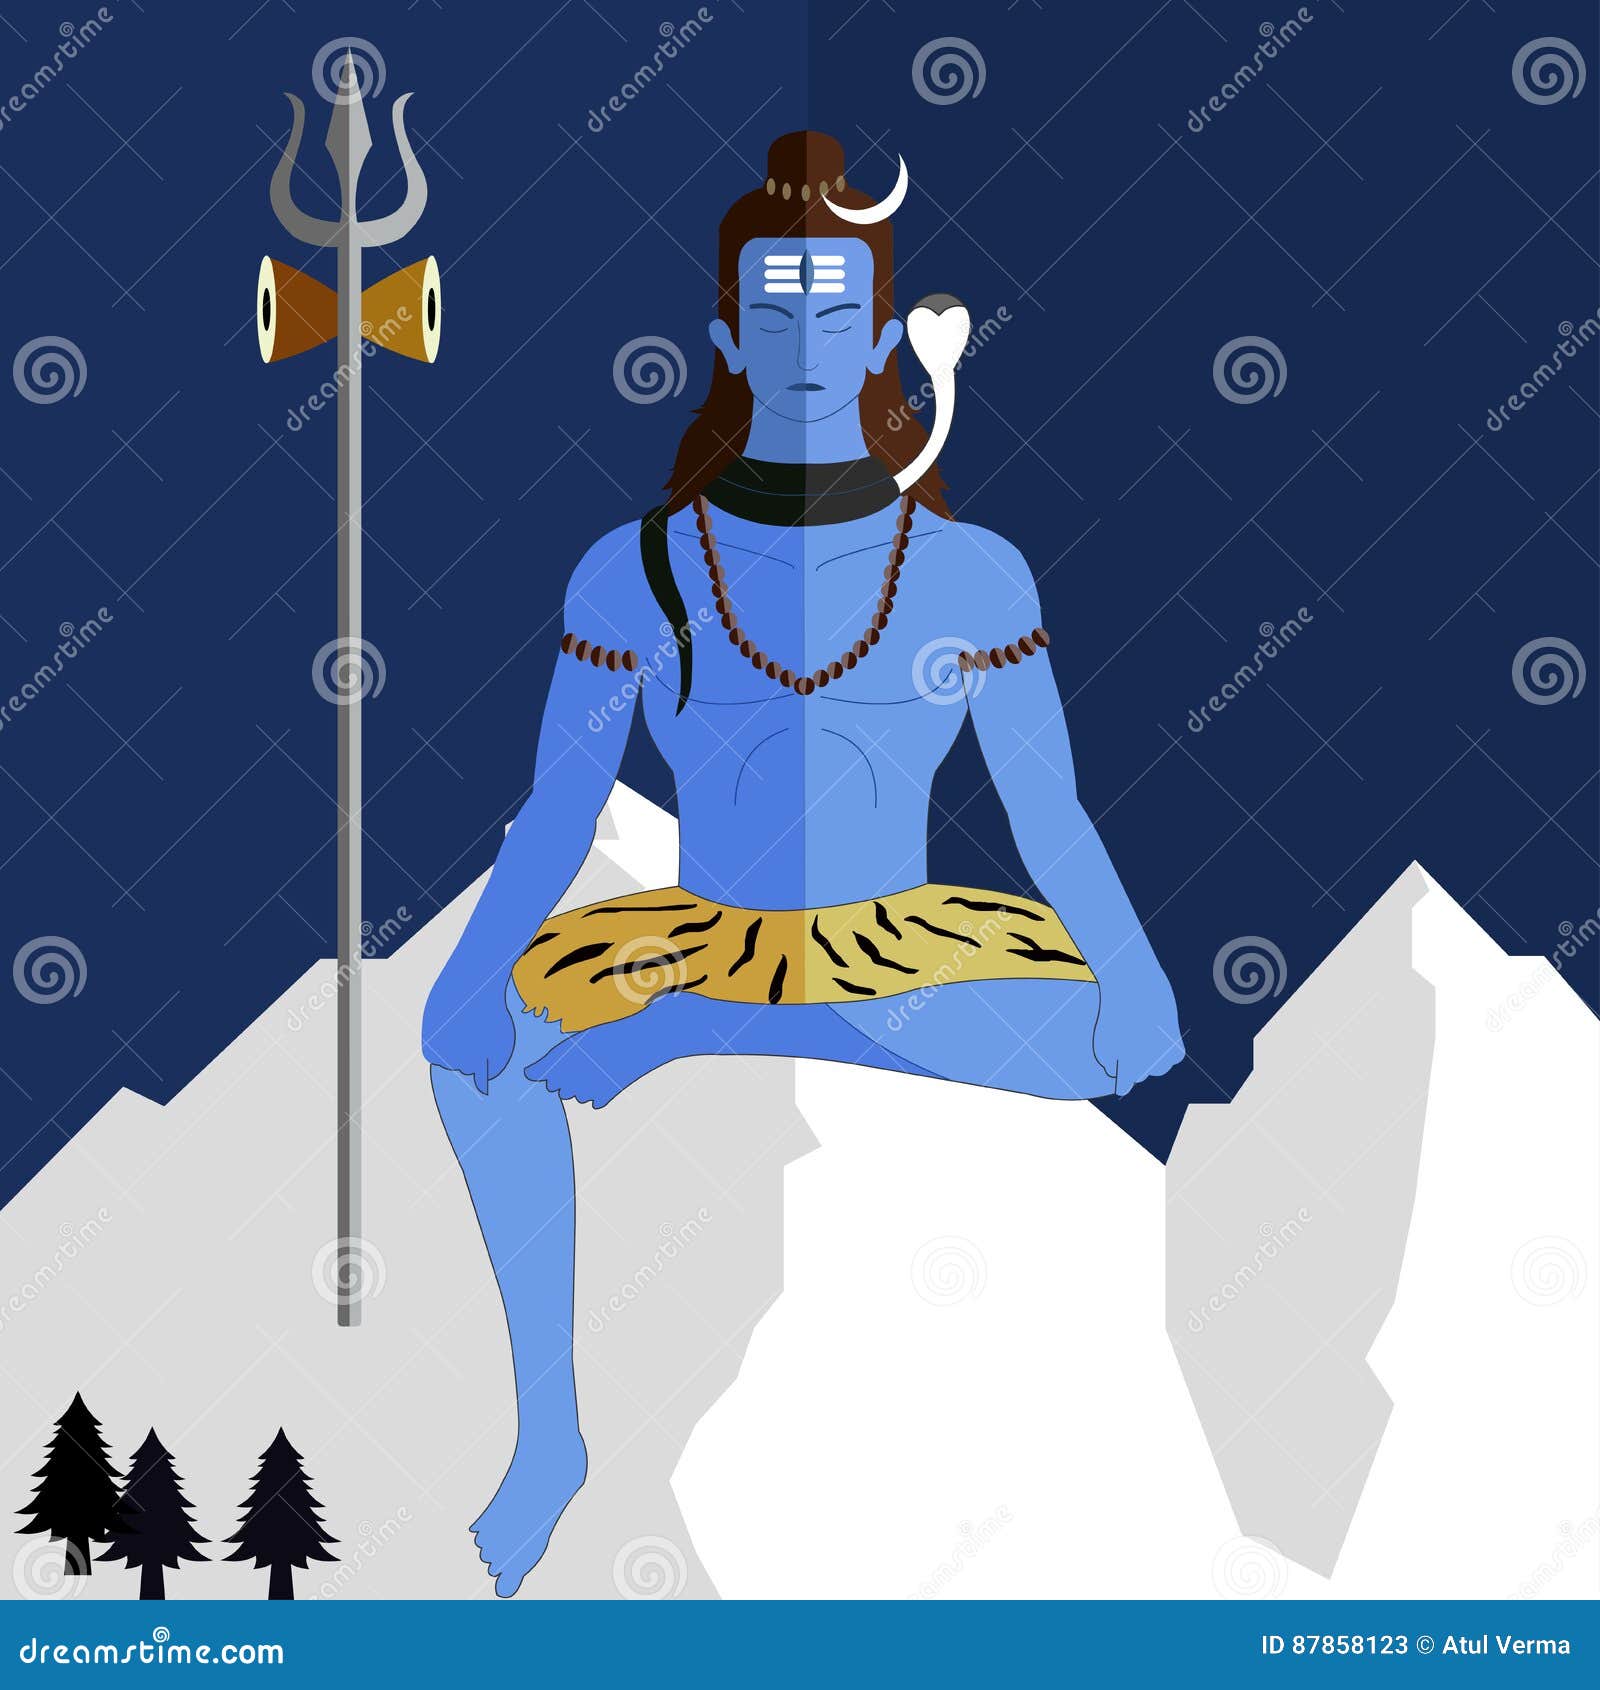 5 Ace Hand Draw Shiv Ji Lord God Hindu Religious Photo Sticker Poster for  Pooja; Wall Decor (Paper; 12x18 inch; Multicolor) : Amazon.in: Home &  Kitchen